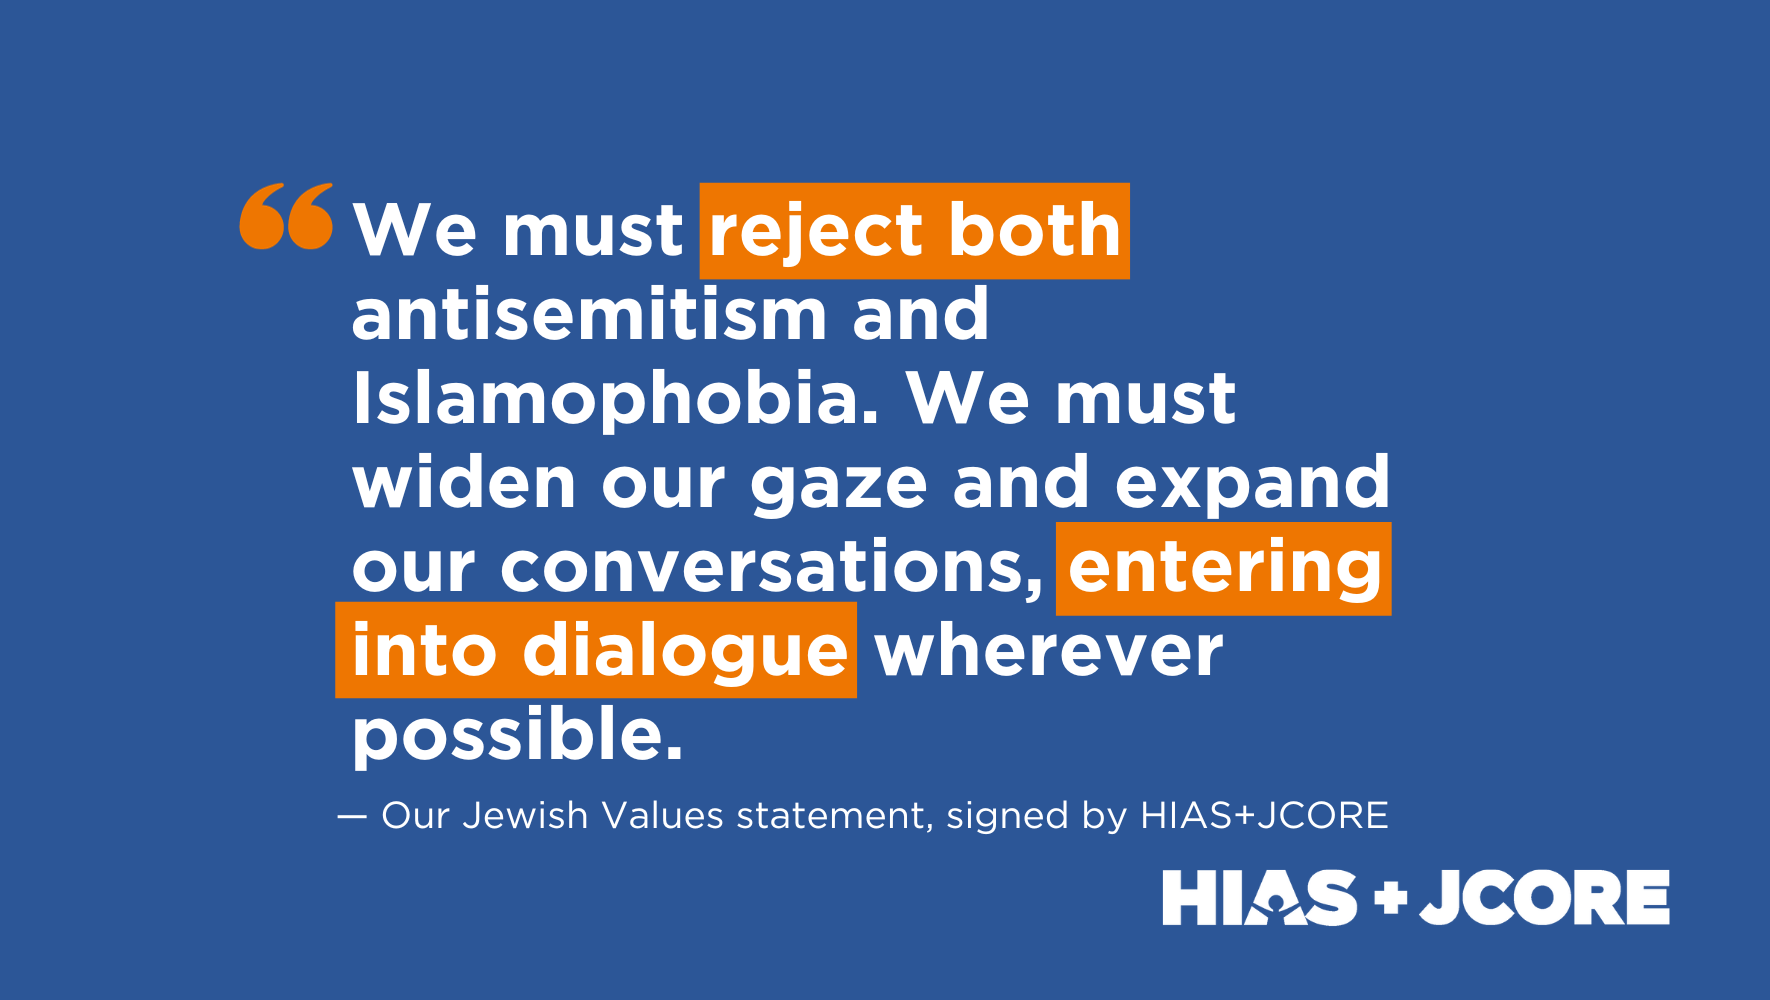 Statement reads: We must reject both antisemitism and Islamophobia. We must widen our gaze and expand our conversations, entering into dialogue wherever possible.